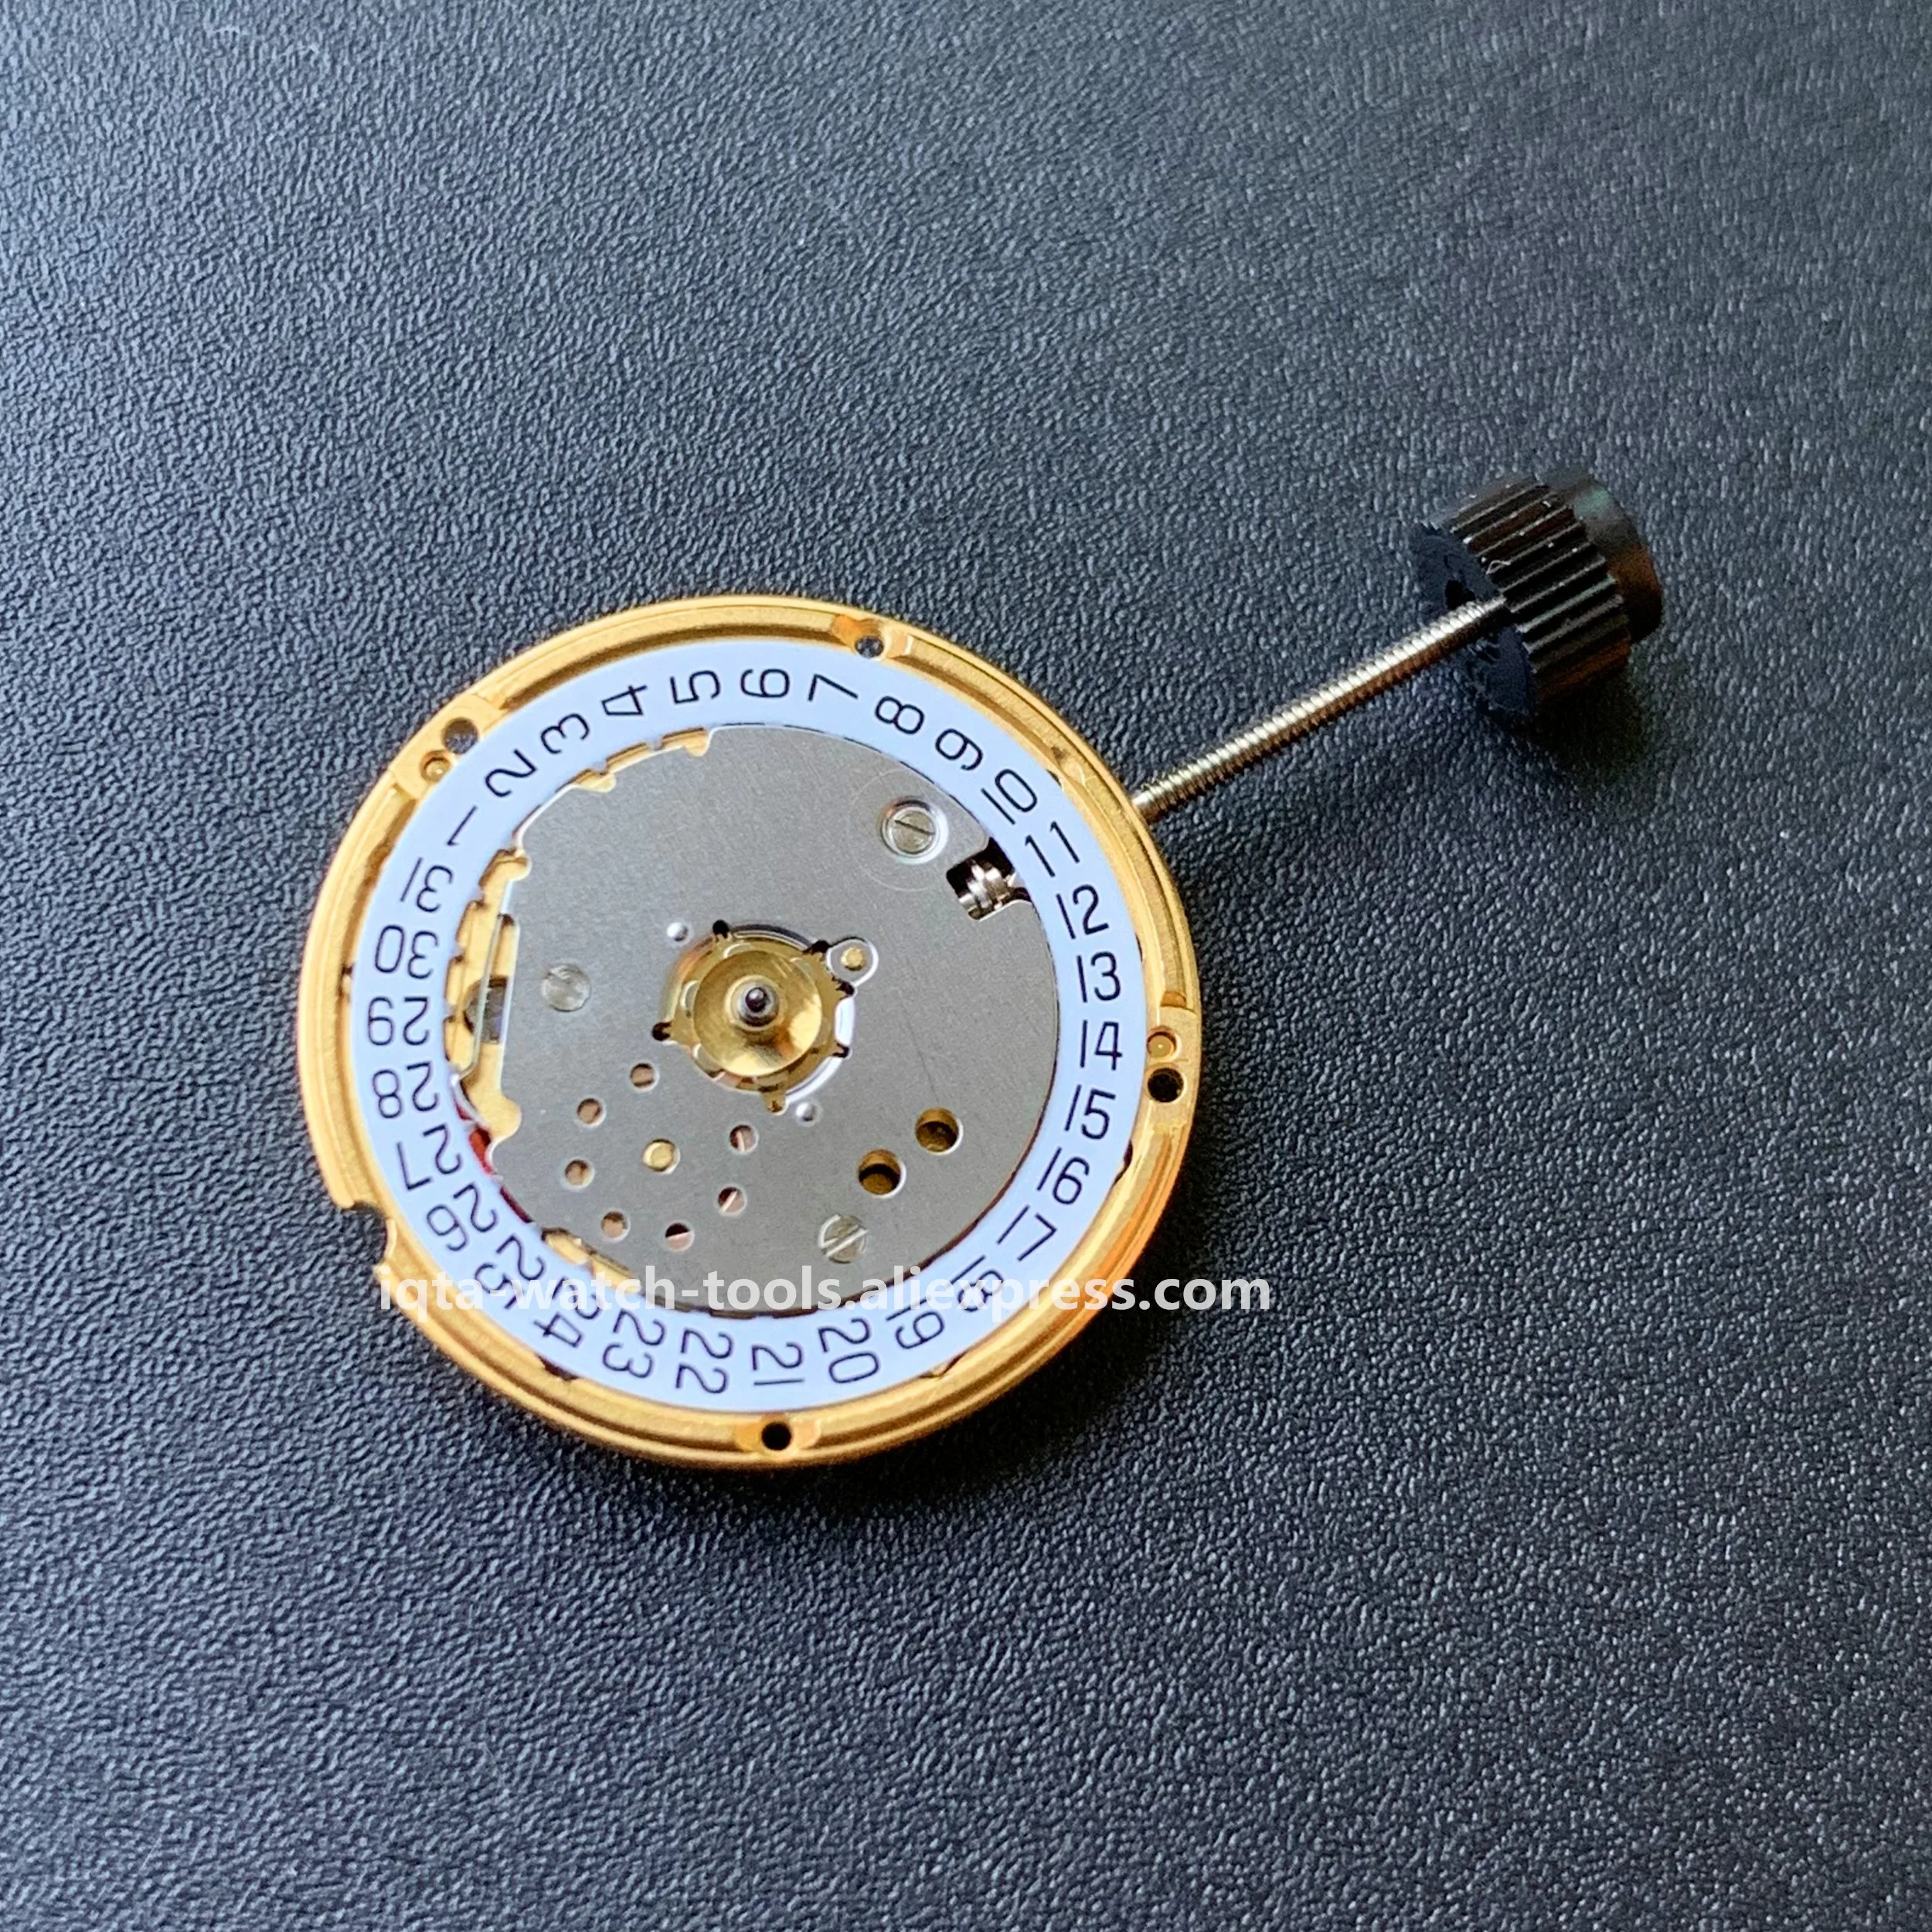 New V8 For Eta F03.111 Watch Quartz Movement Date At 3 Watch Repair Parts  Without Battery - Watch Movement - AliExpress